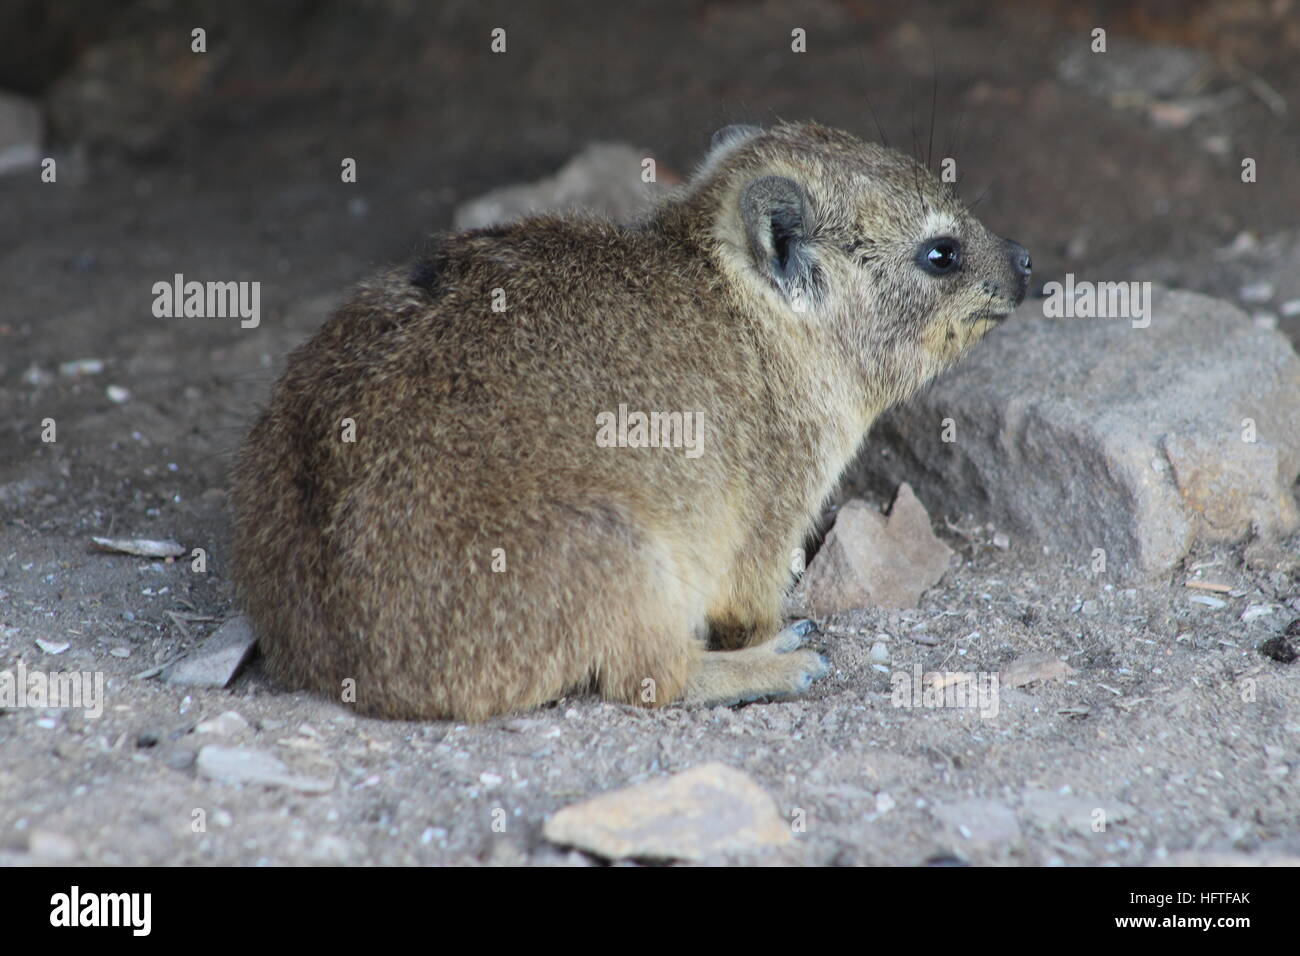 Hyrax in Mossel Bay, South Africa. In South Africa specifically known as a Dassie. Also called a rock rabbit. Stock Photo